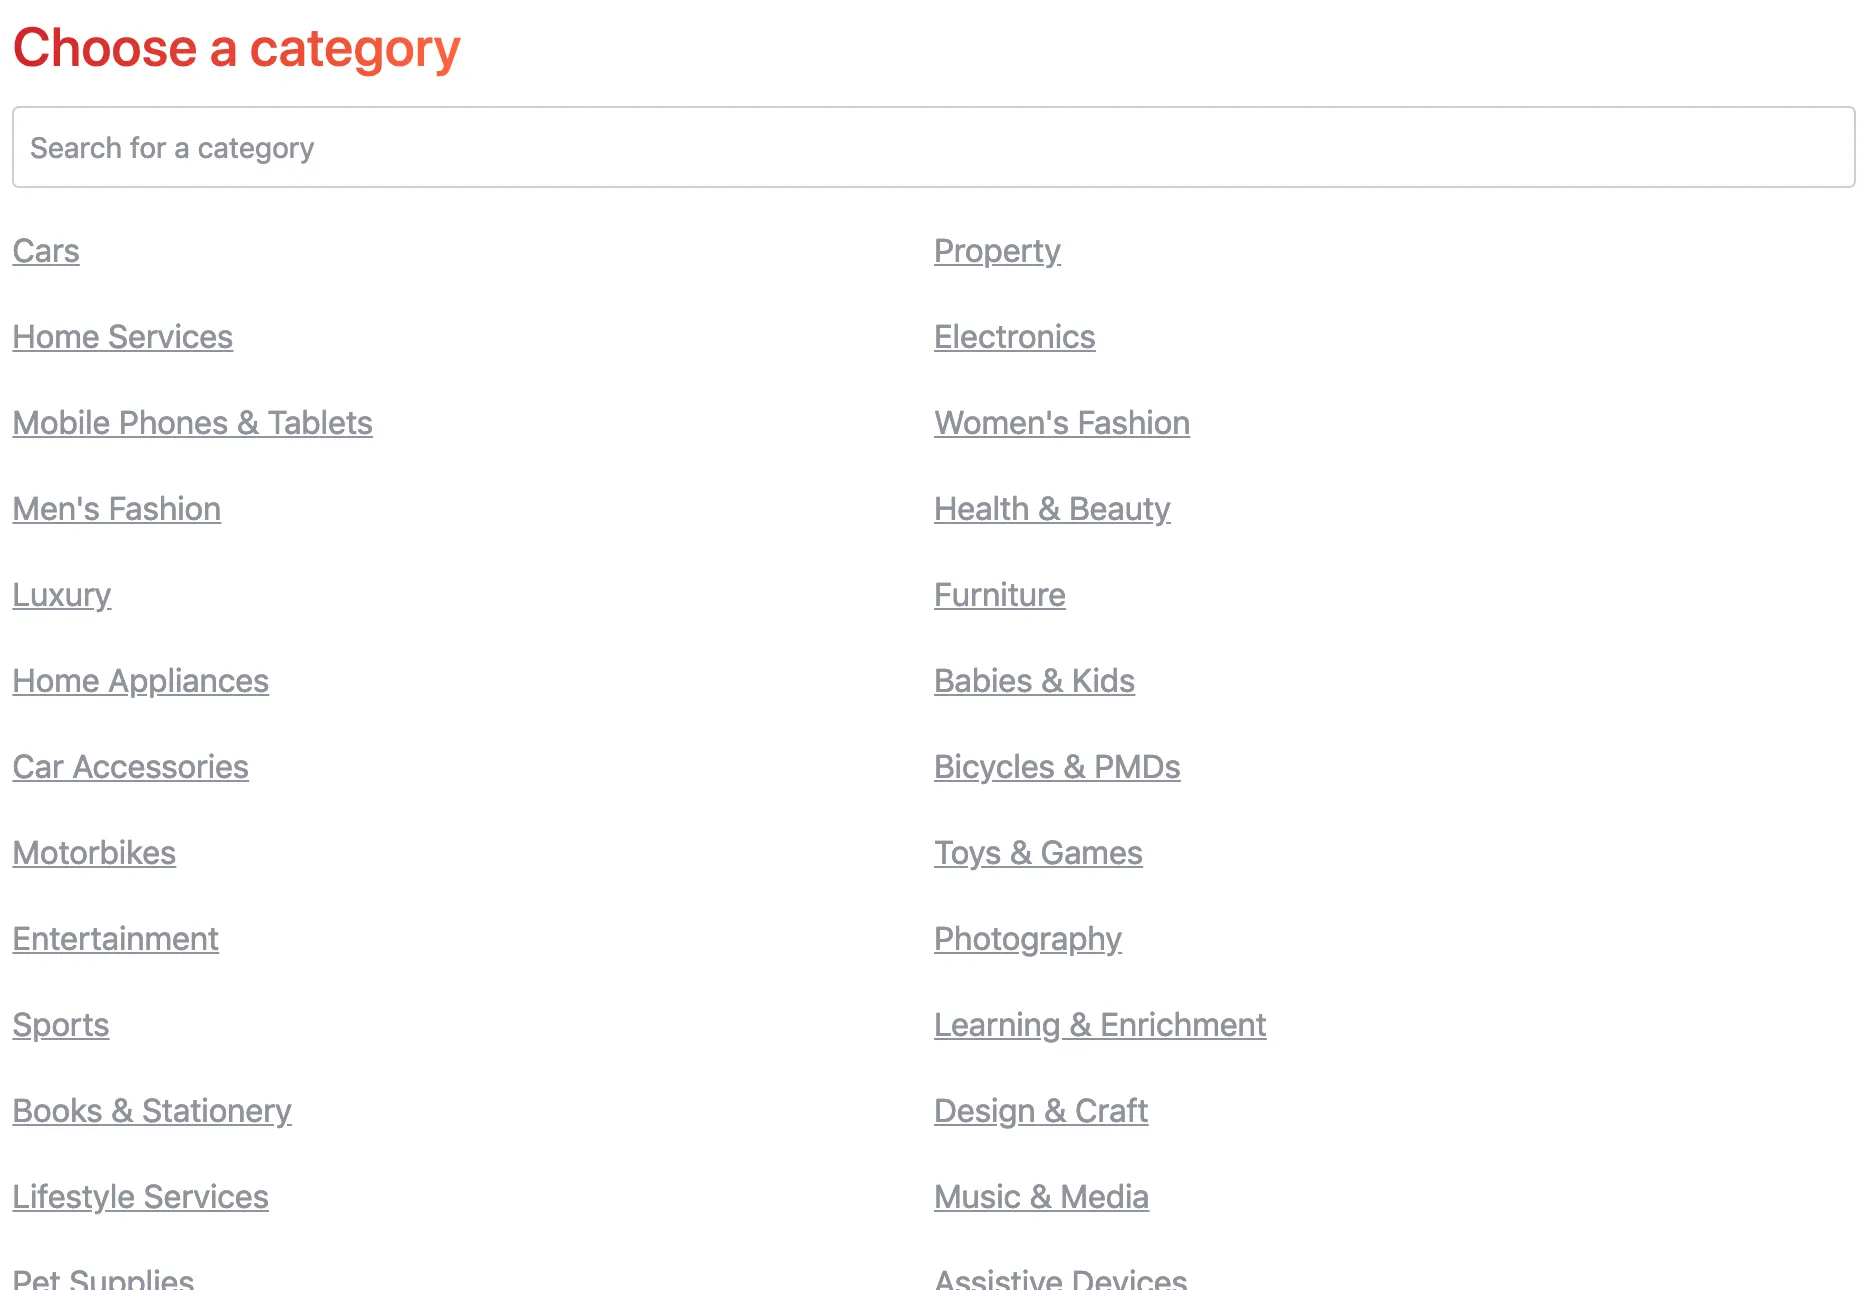 With the number of categories that we have, the category search bar becomes
especially useful.